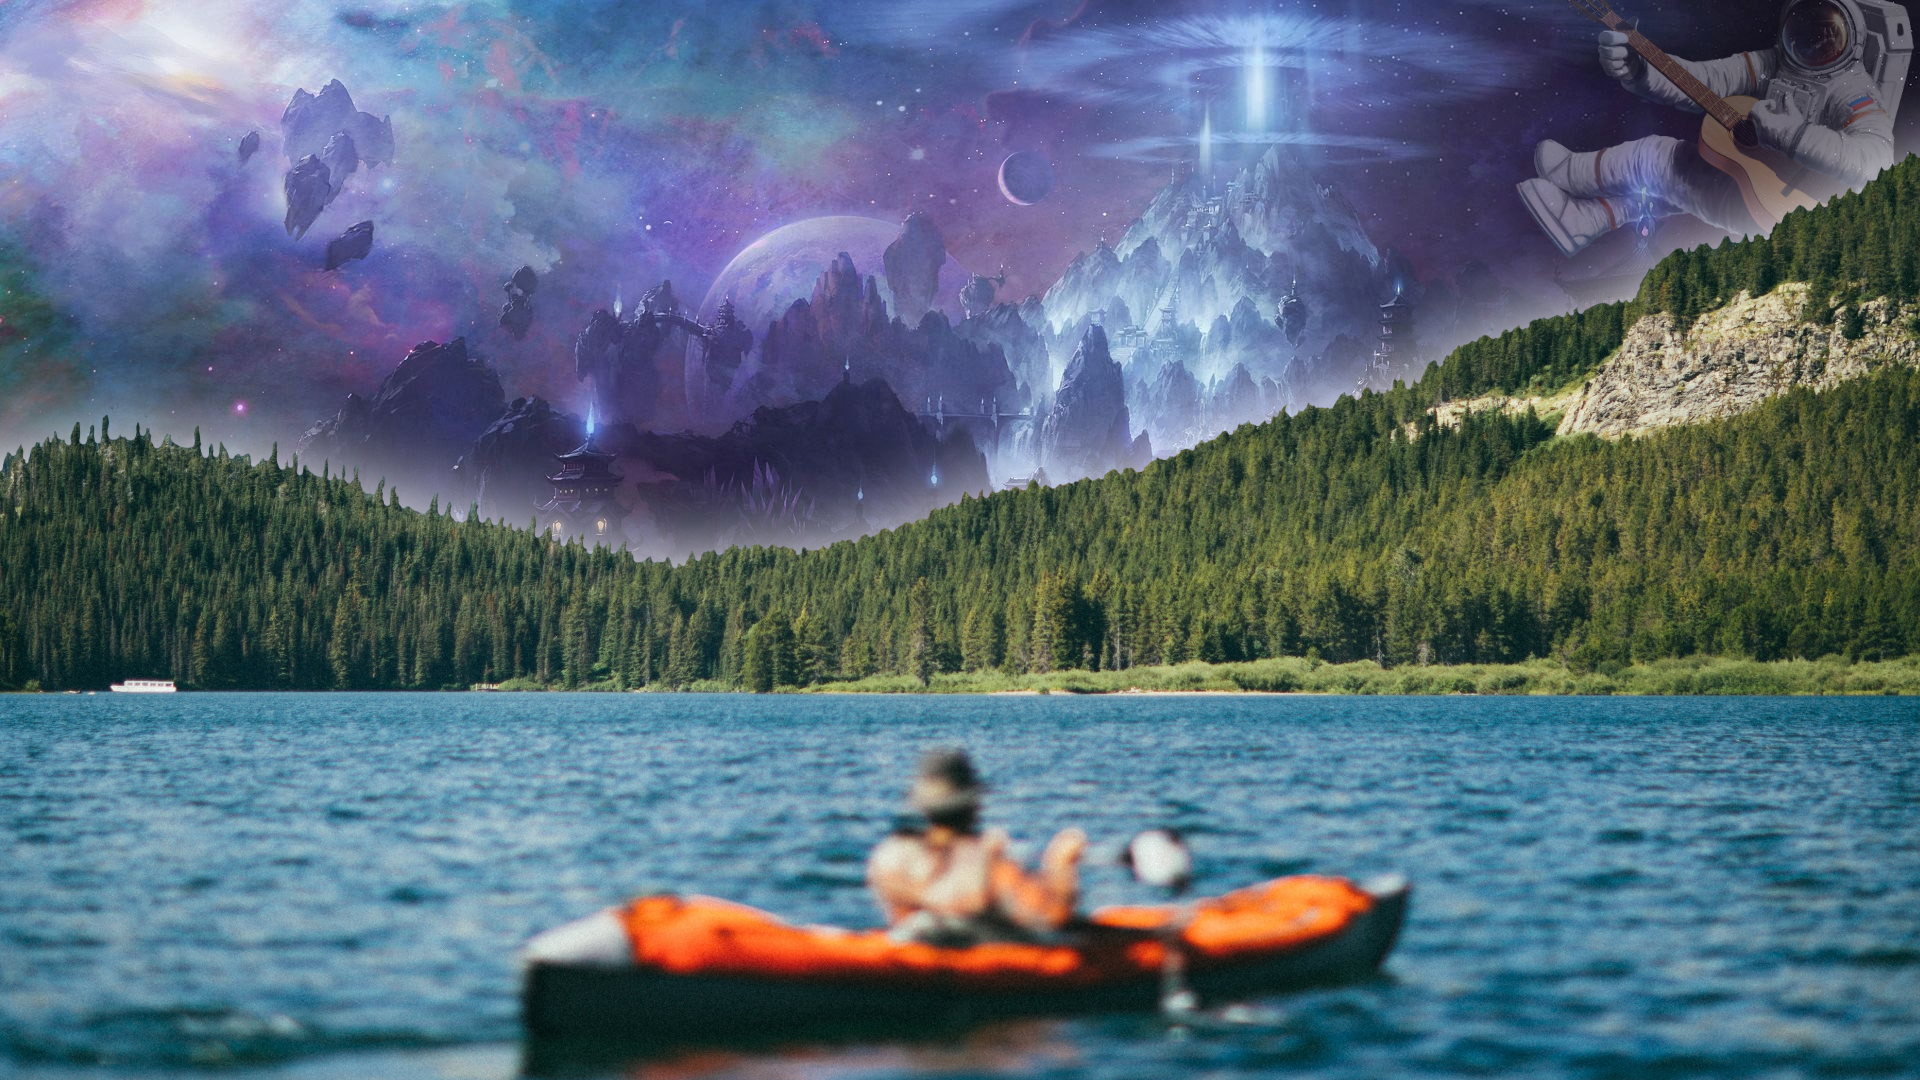 Boat Canoes Water Lake Forest Photoshop Sky Astronaut Guitar 1920x1080